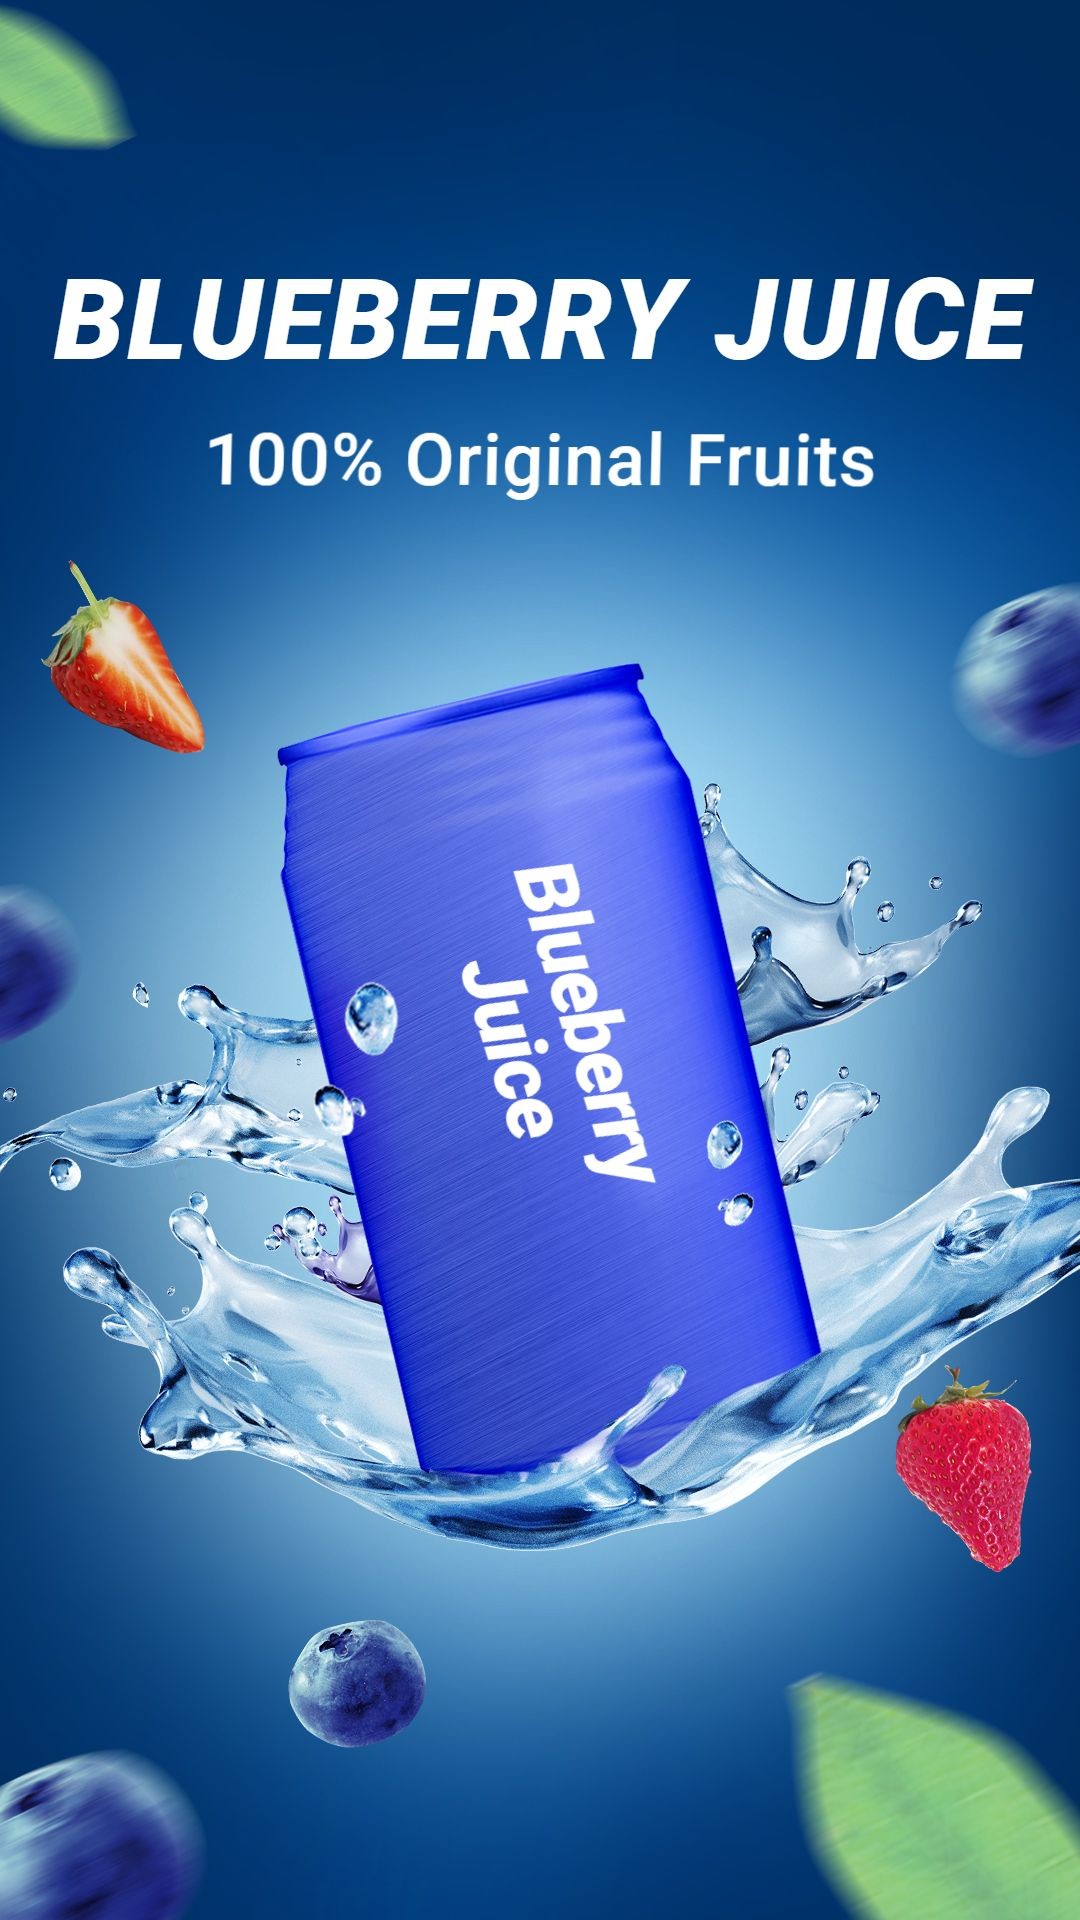 Blueberry Juice Consumer Packaged Drinks Ecommerce Story预览效果